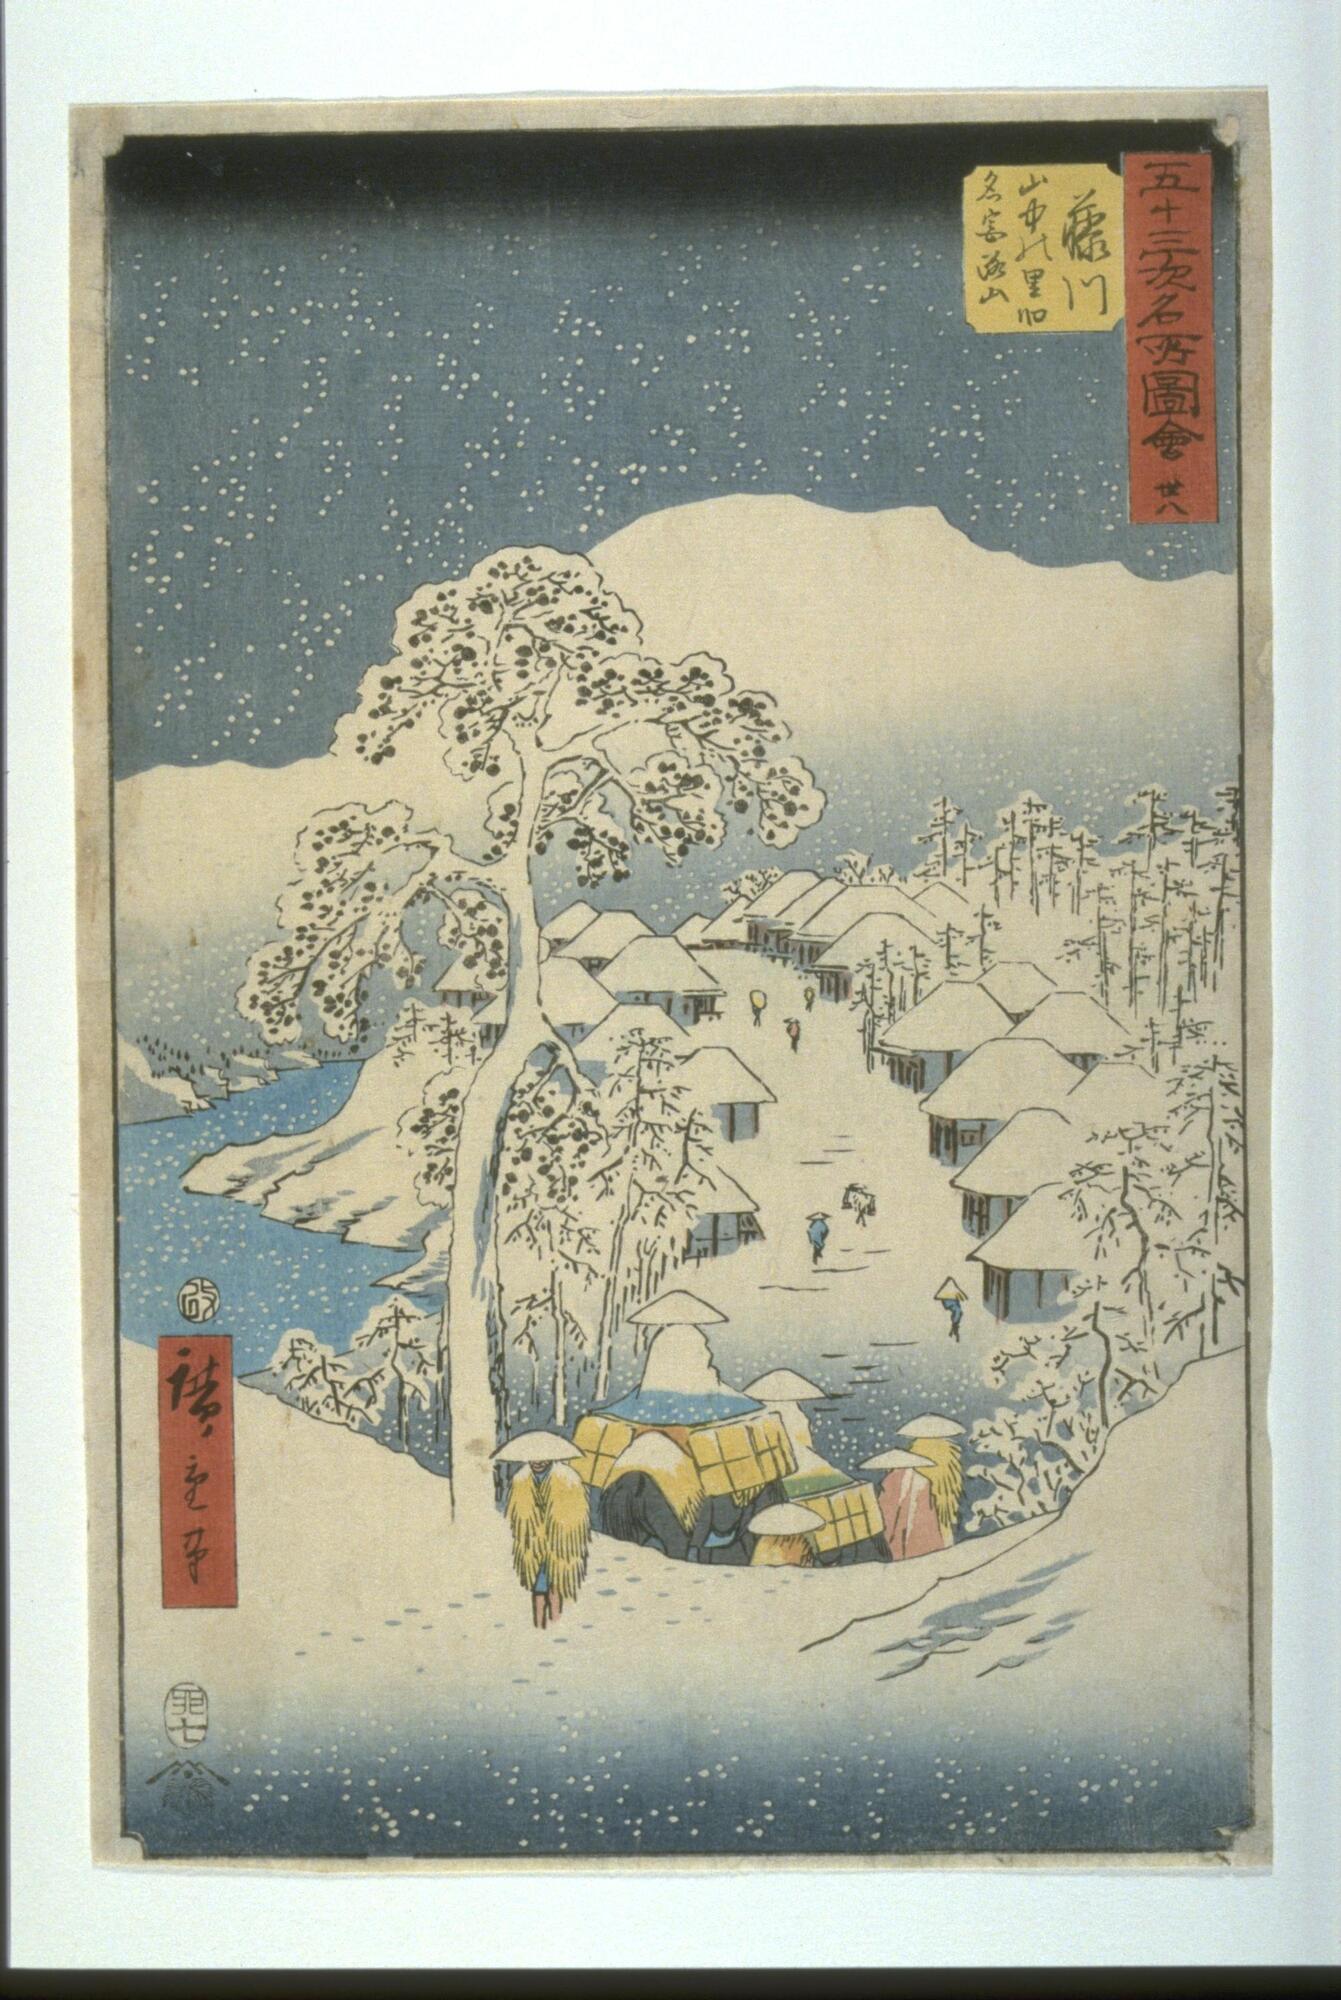 A village by a lake is shown in the snow. Several travelers are walking in the streets. The snow is steadily fallling and covers their hats, the roofs of the houses, the trees and the mountains. The title is in the upper right corner in a red box.